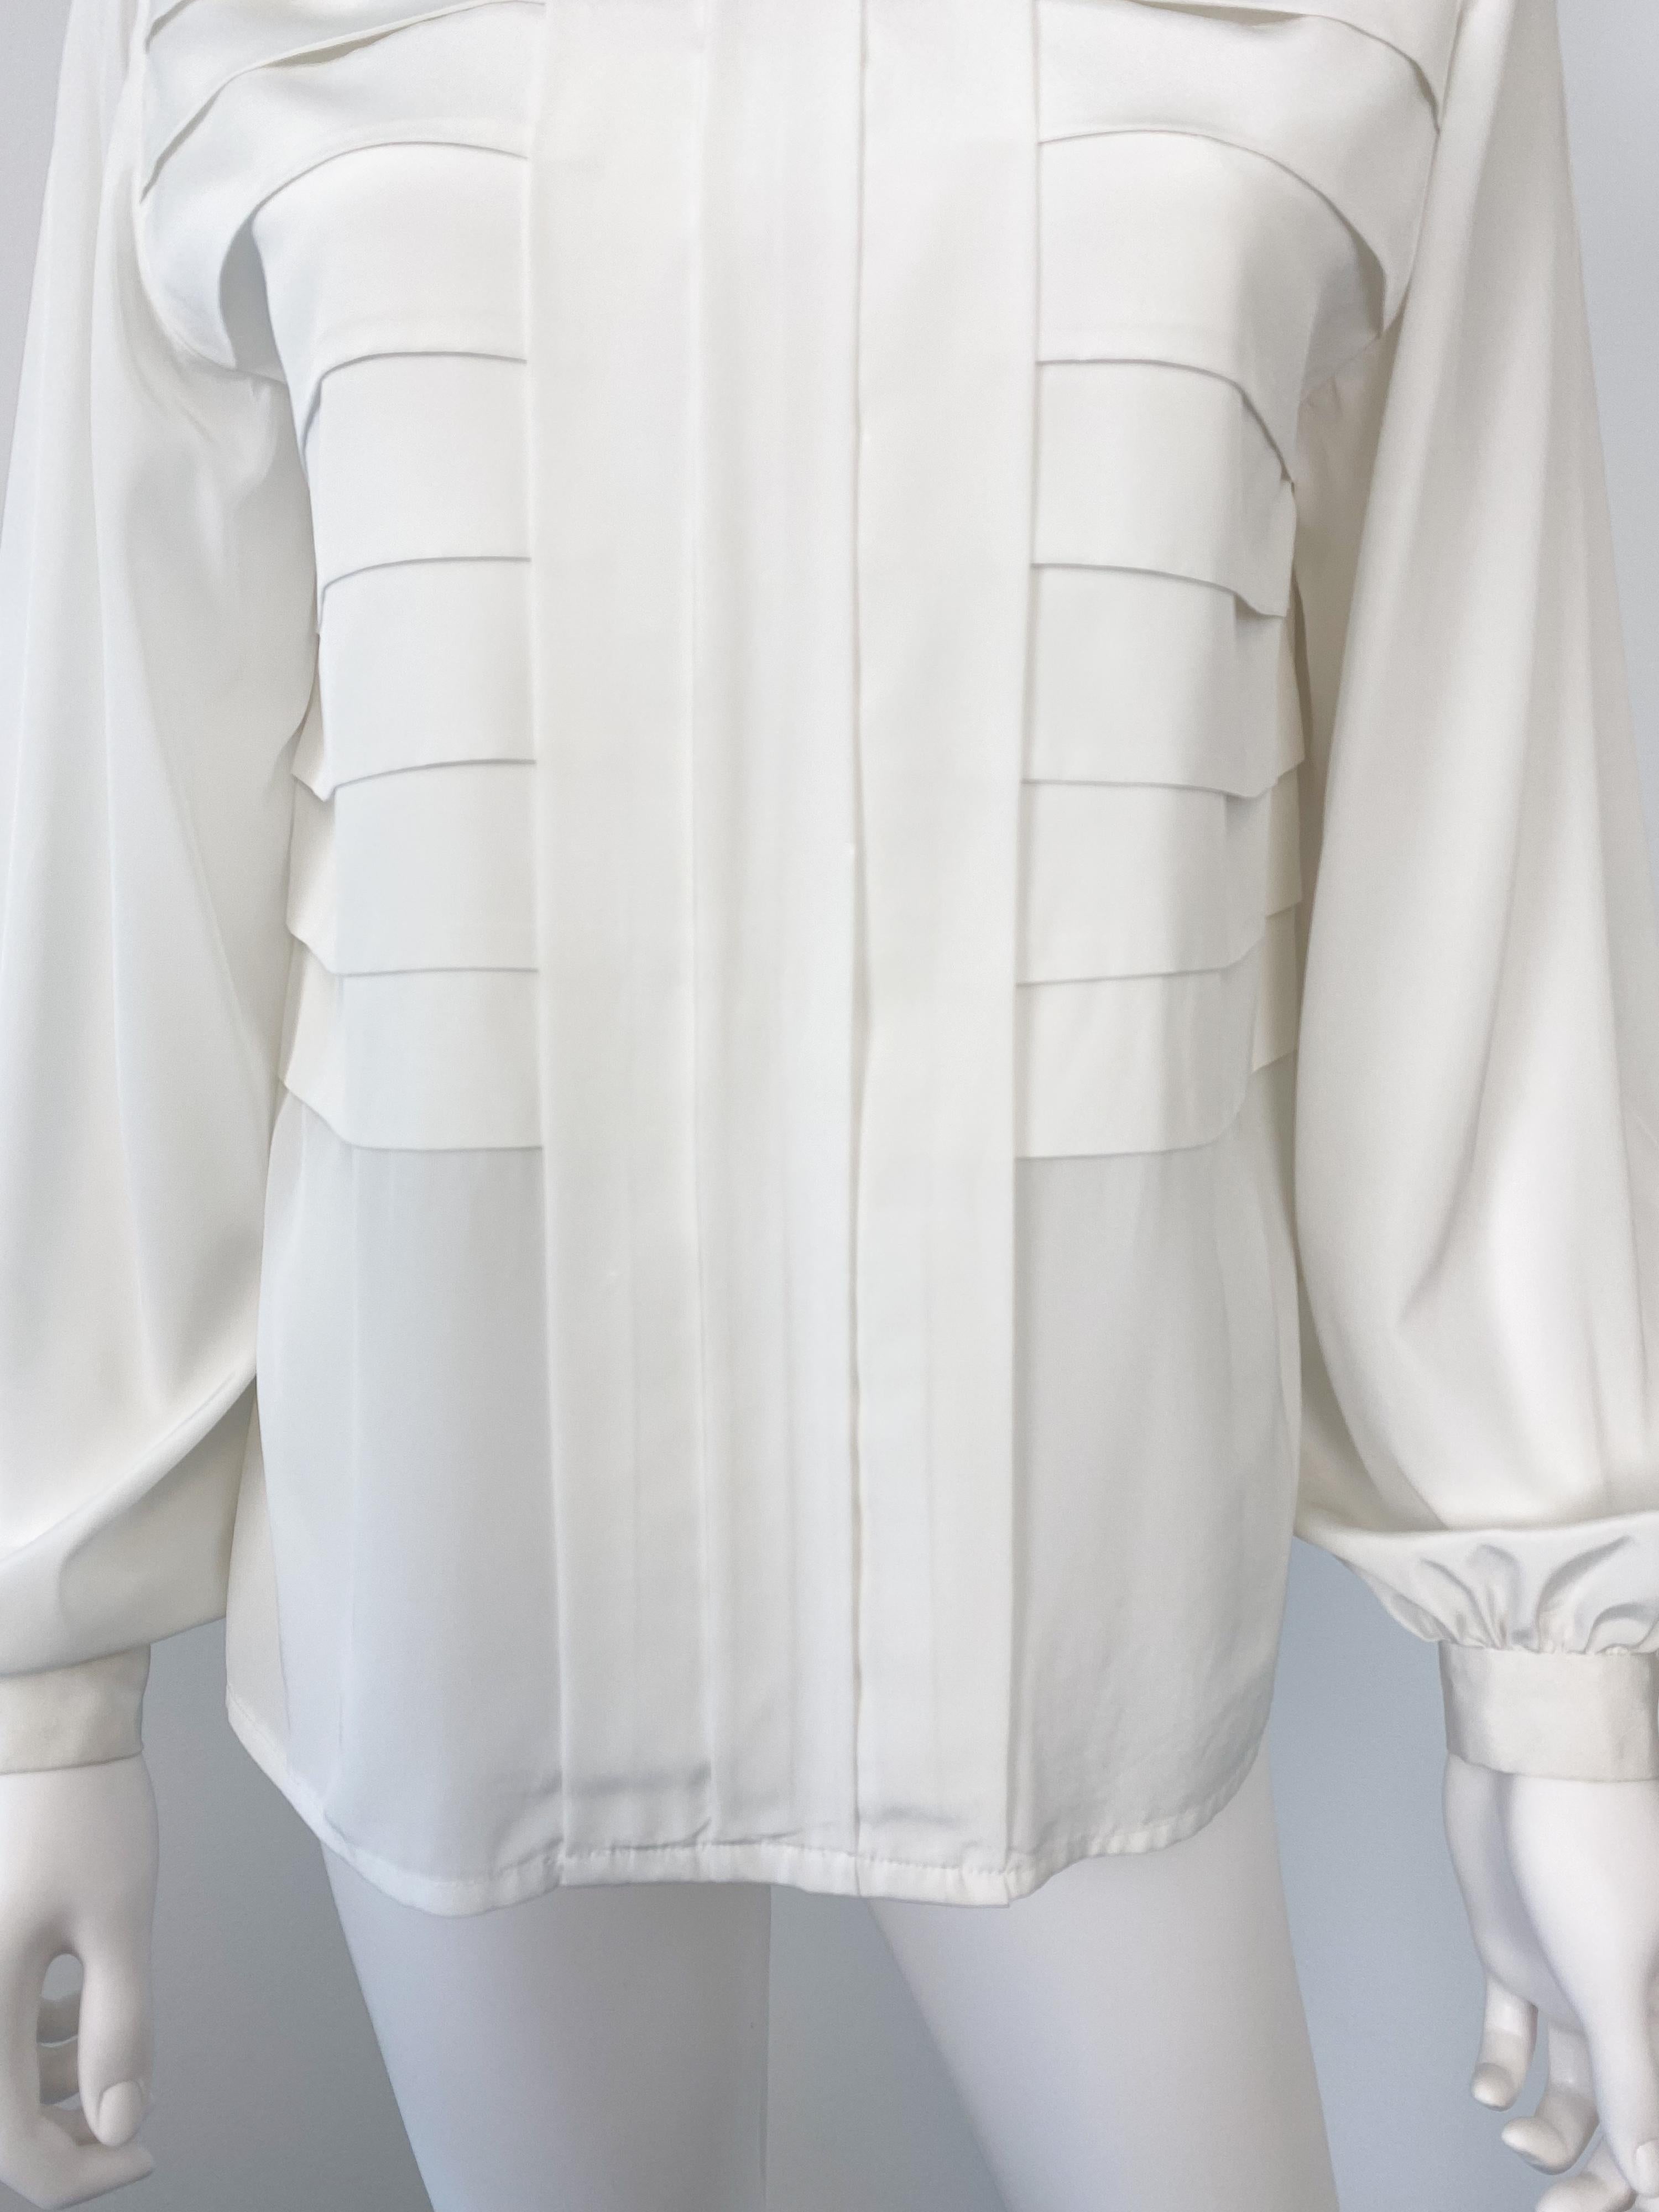 Women's Vintage 1970s Silky Polyester Blouse Top White Origami Pleat Size 10/12 For Sale